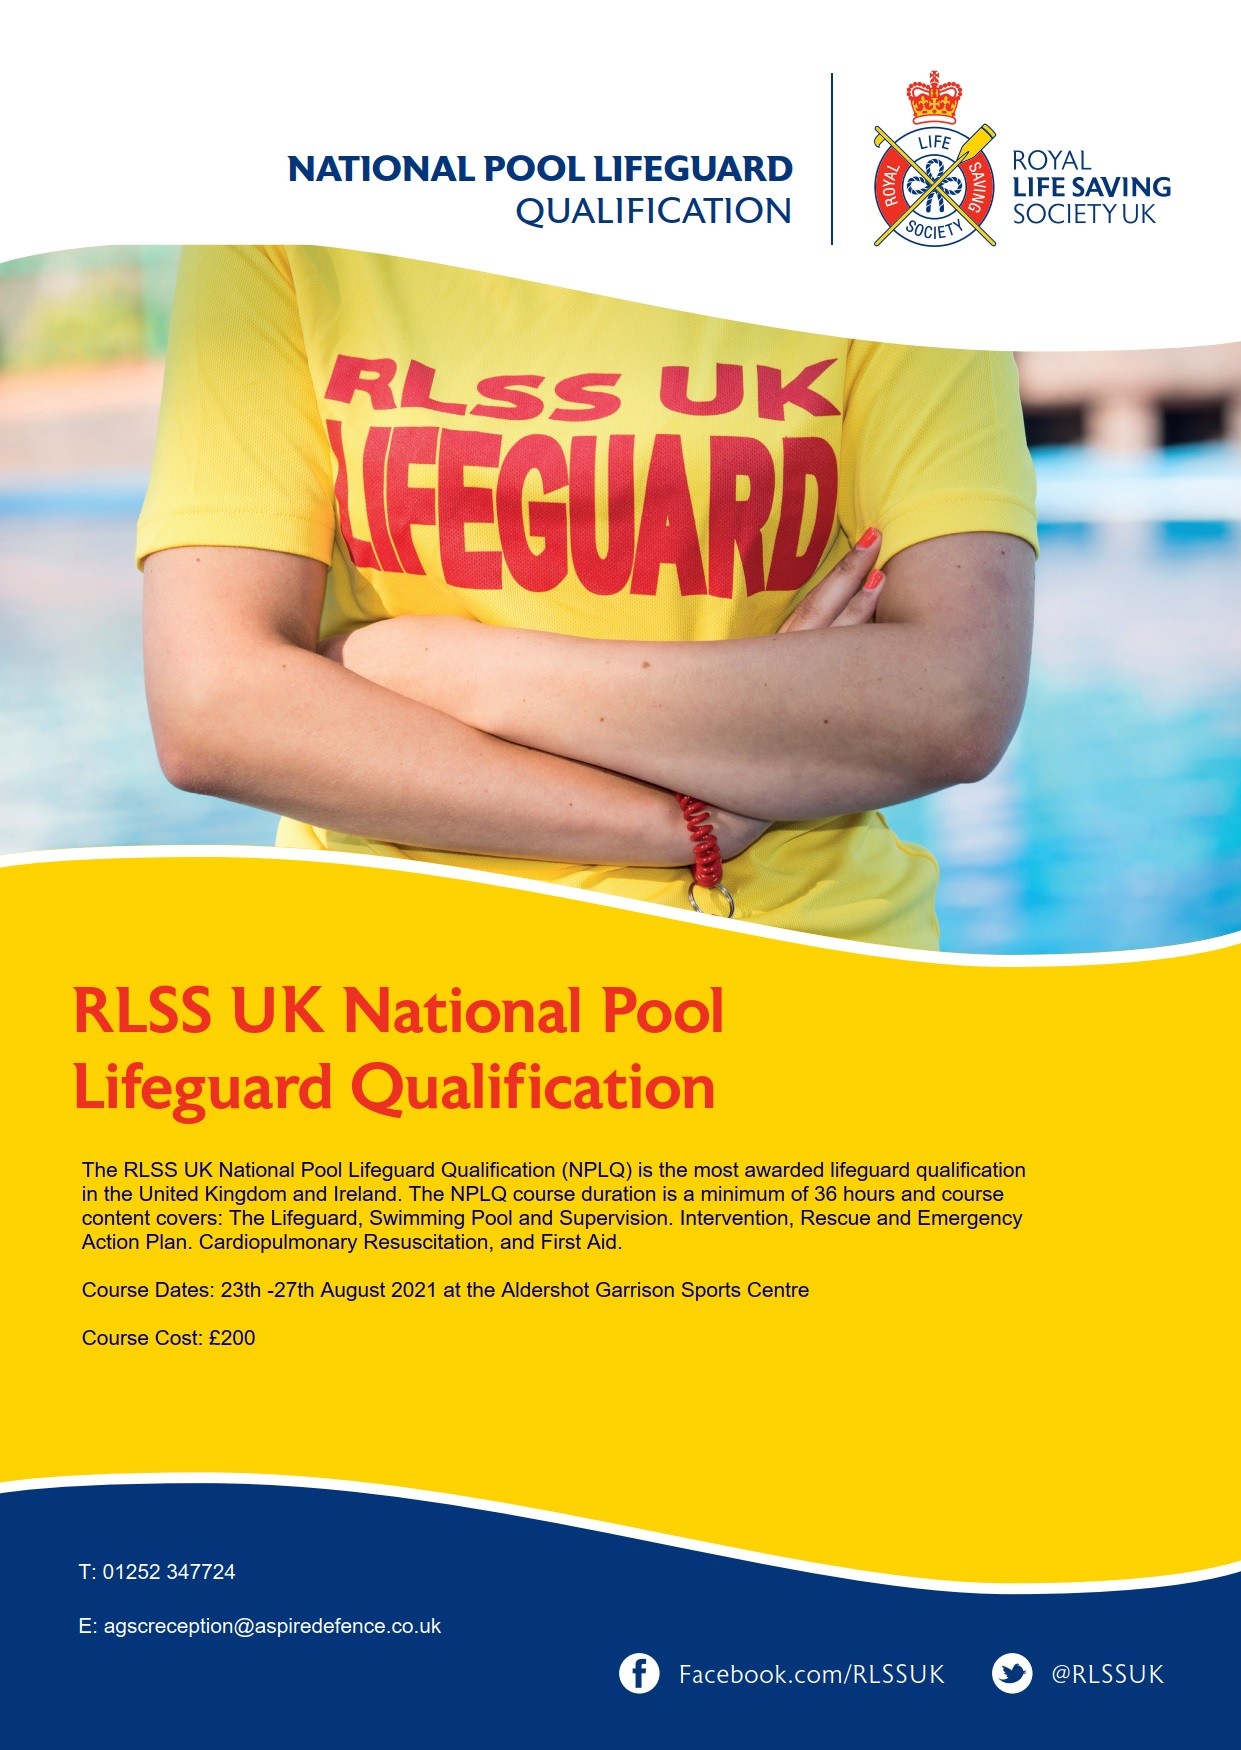 National Pool Lifeguard Course 12th, 15th, 17th, 18th, 19th November